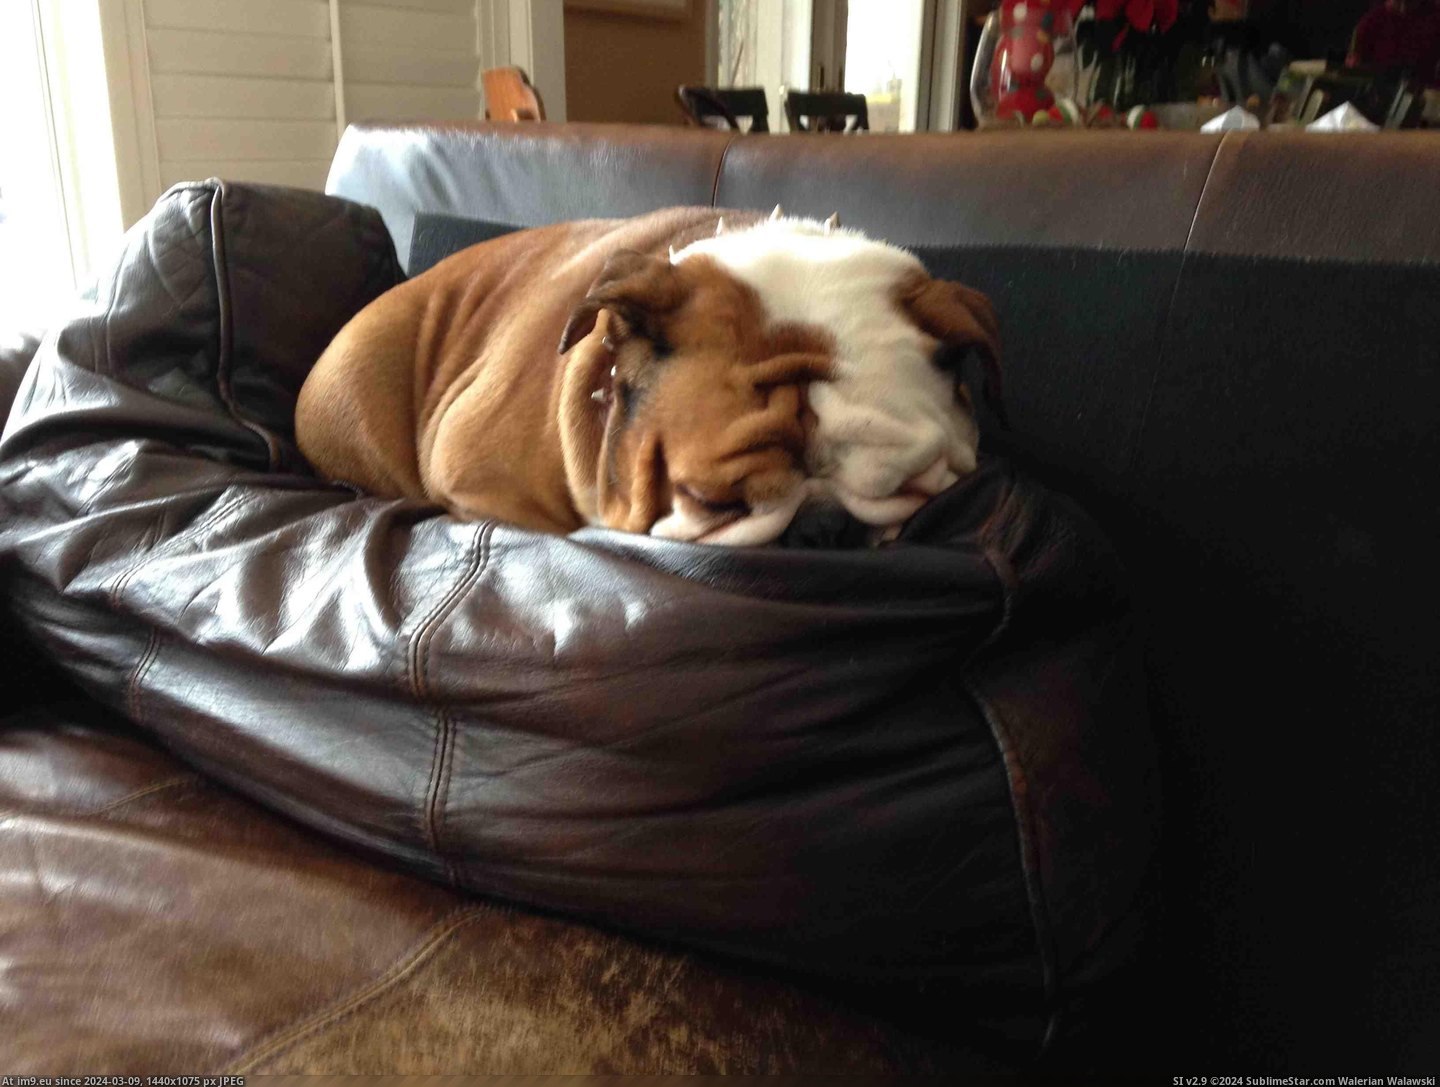 #Cute #But #She #Ruined #Cushions #How #Can #Couch [Aww] She has ruined most of my couch cushions but I can't help how cute she is... Pic. (Bild von album My r/AWW favs))